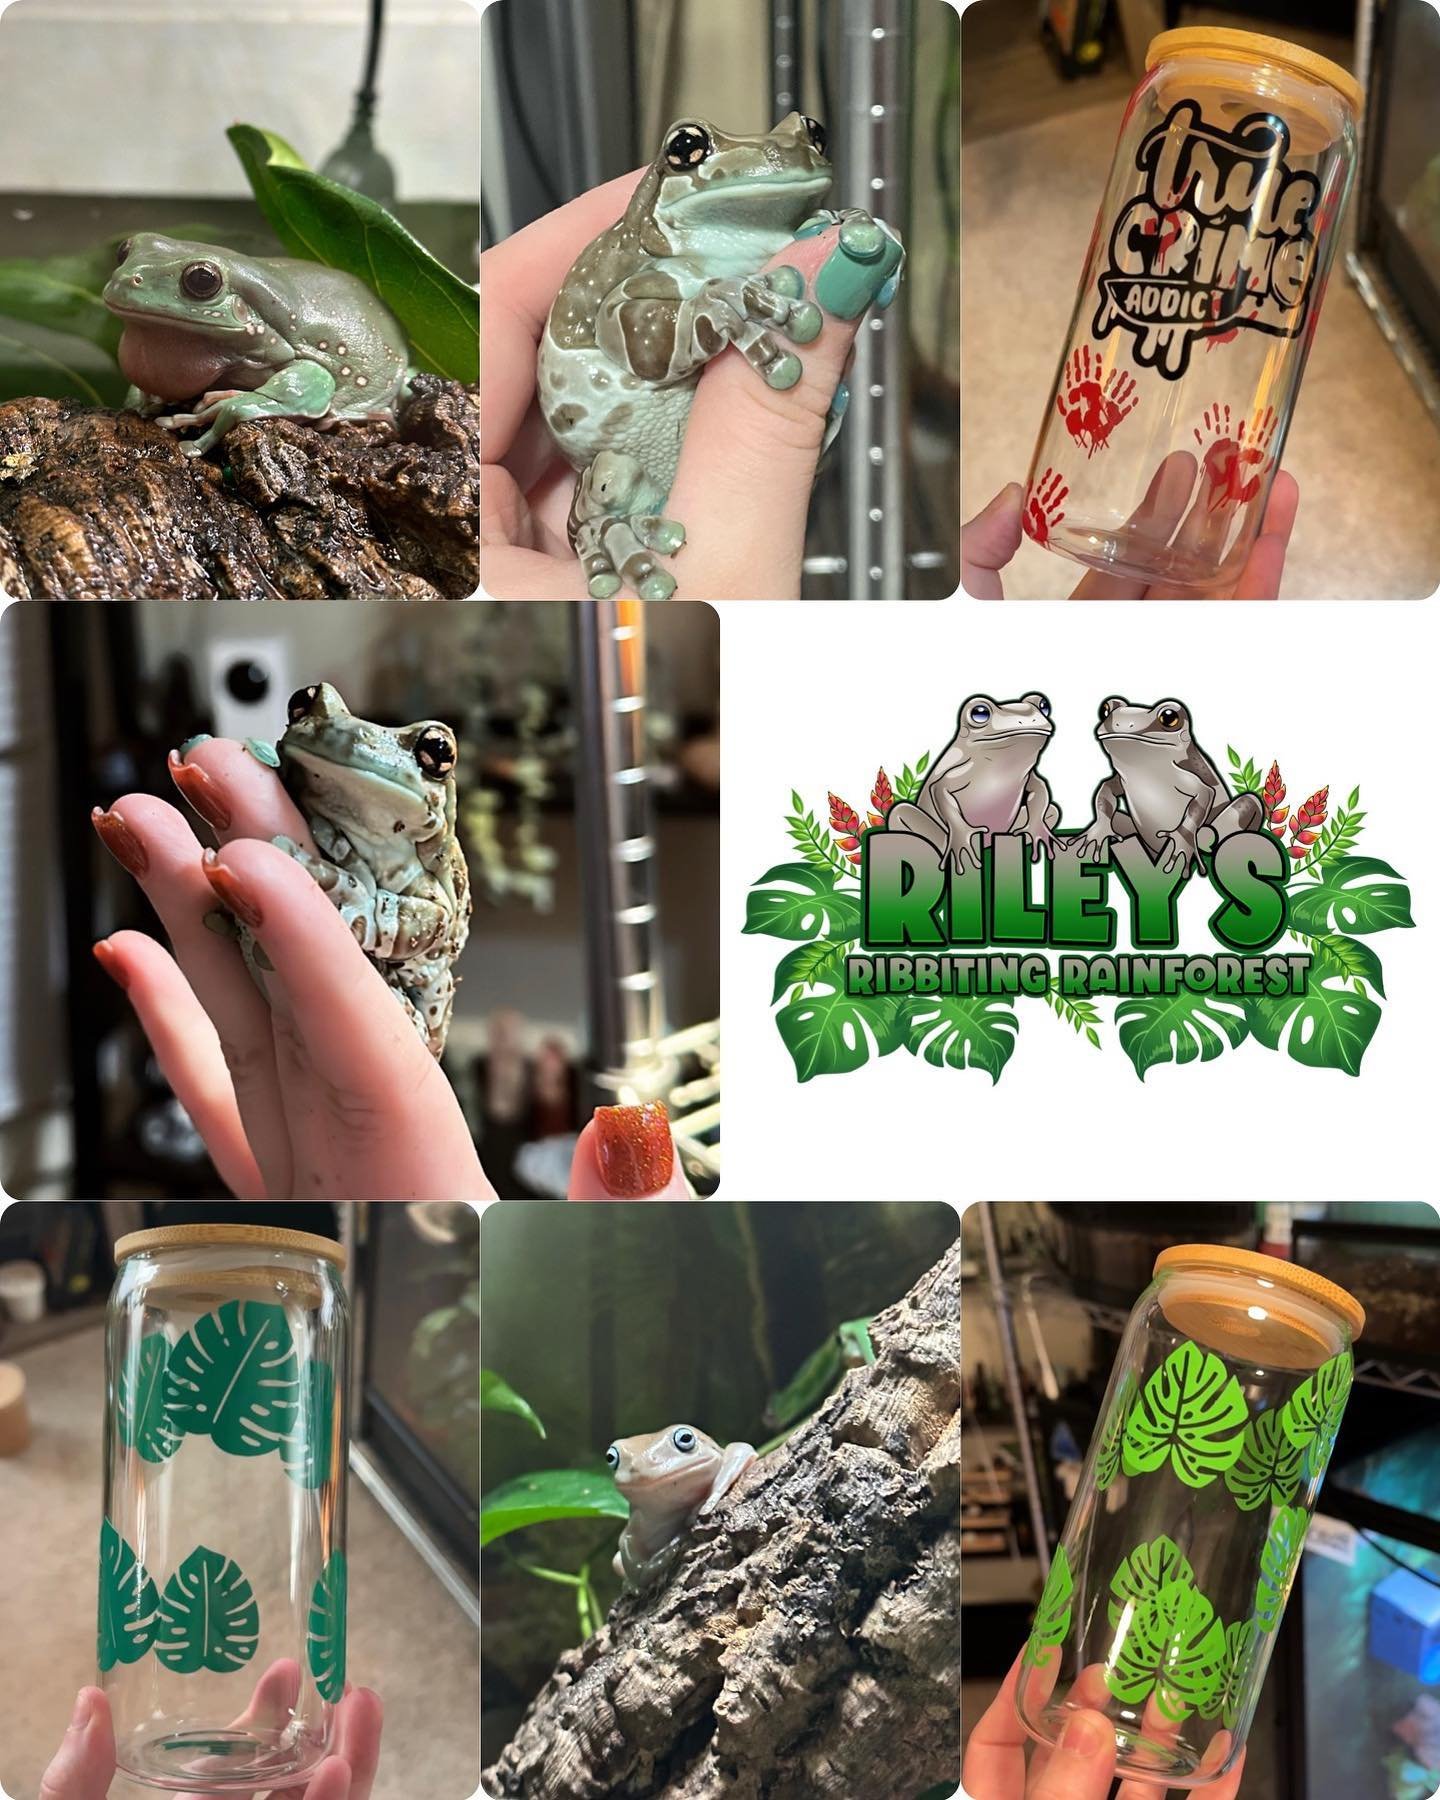 @rileys.ribbiting.rainforest will be vending with us on June 2nd! They will have white tree frogs, vinyl stickers, decals, keychains, &amp; travel mugs! #frog #frogs #exotic #exoticanimals #exoticreptiles #expo #event #reptileexpo #reptileshow #repto